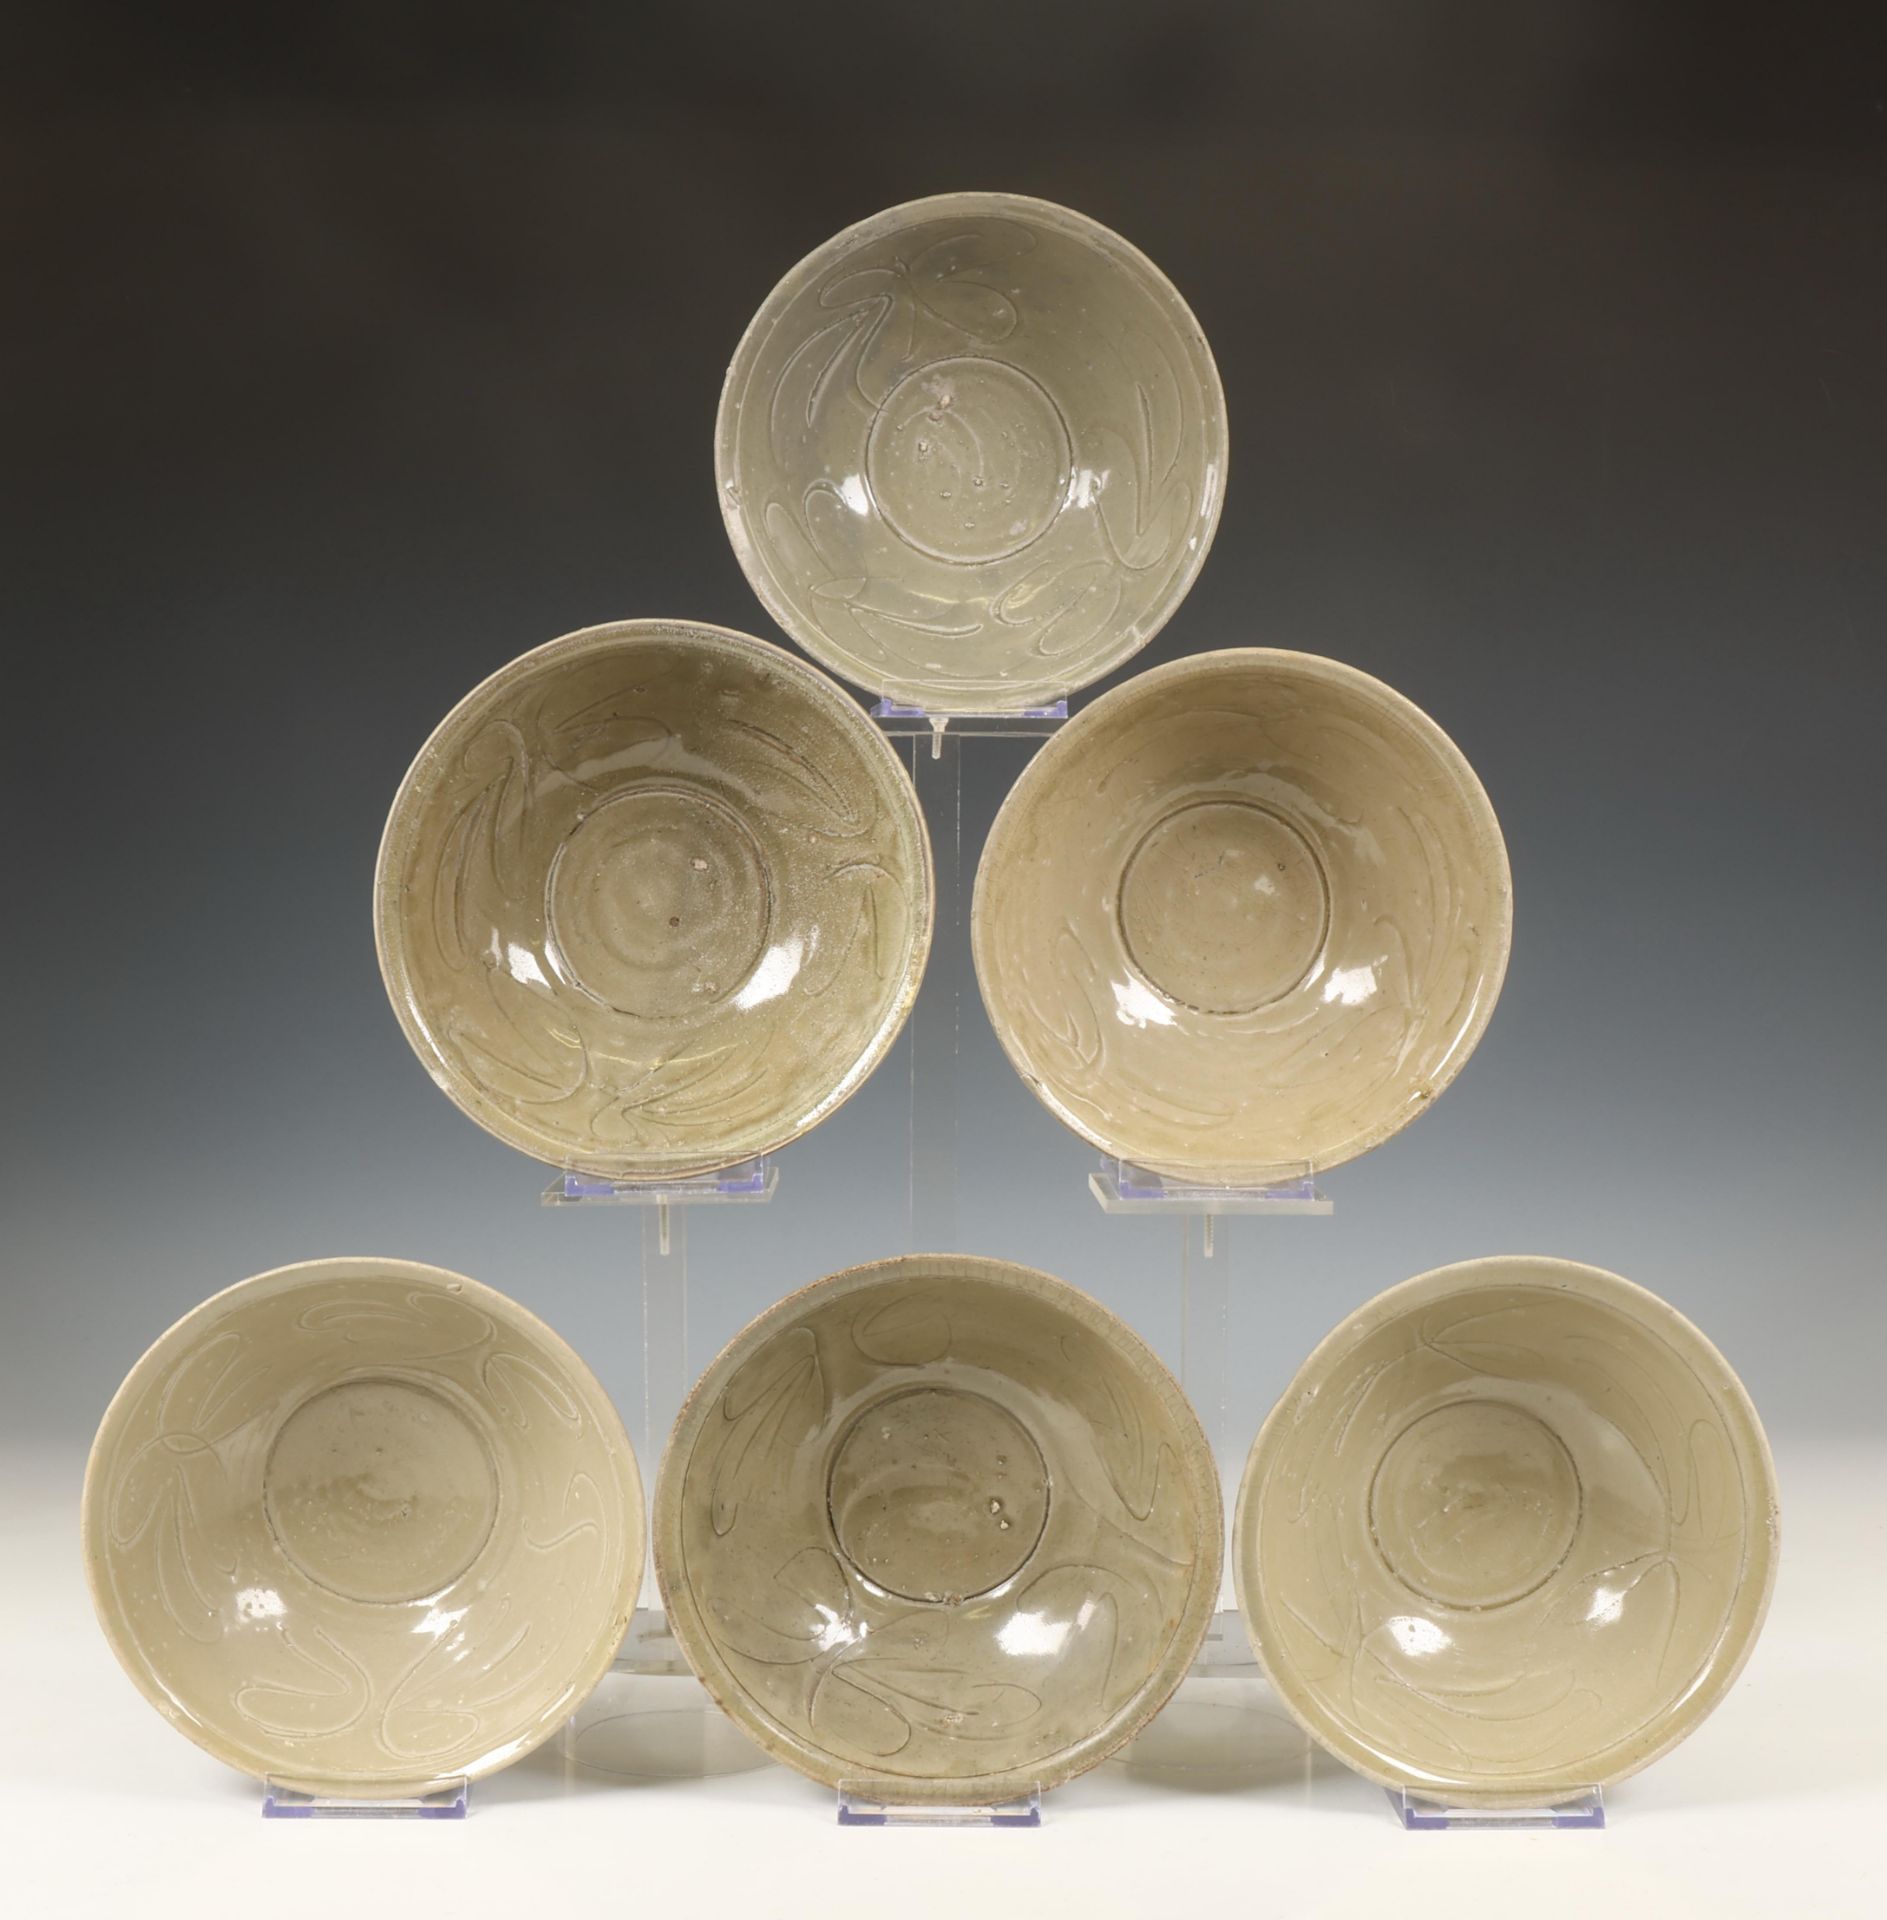 China, collection of twelve celadon-glazed bowls, Northern Song dynasty, 10th-12th century, - Image 2 of 5